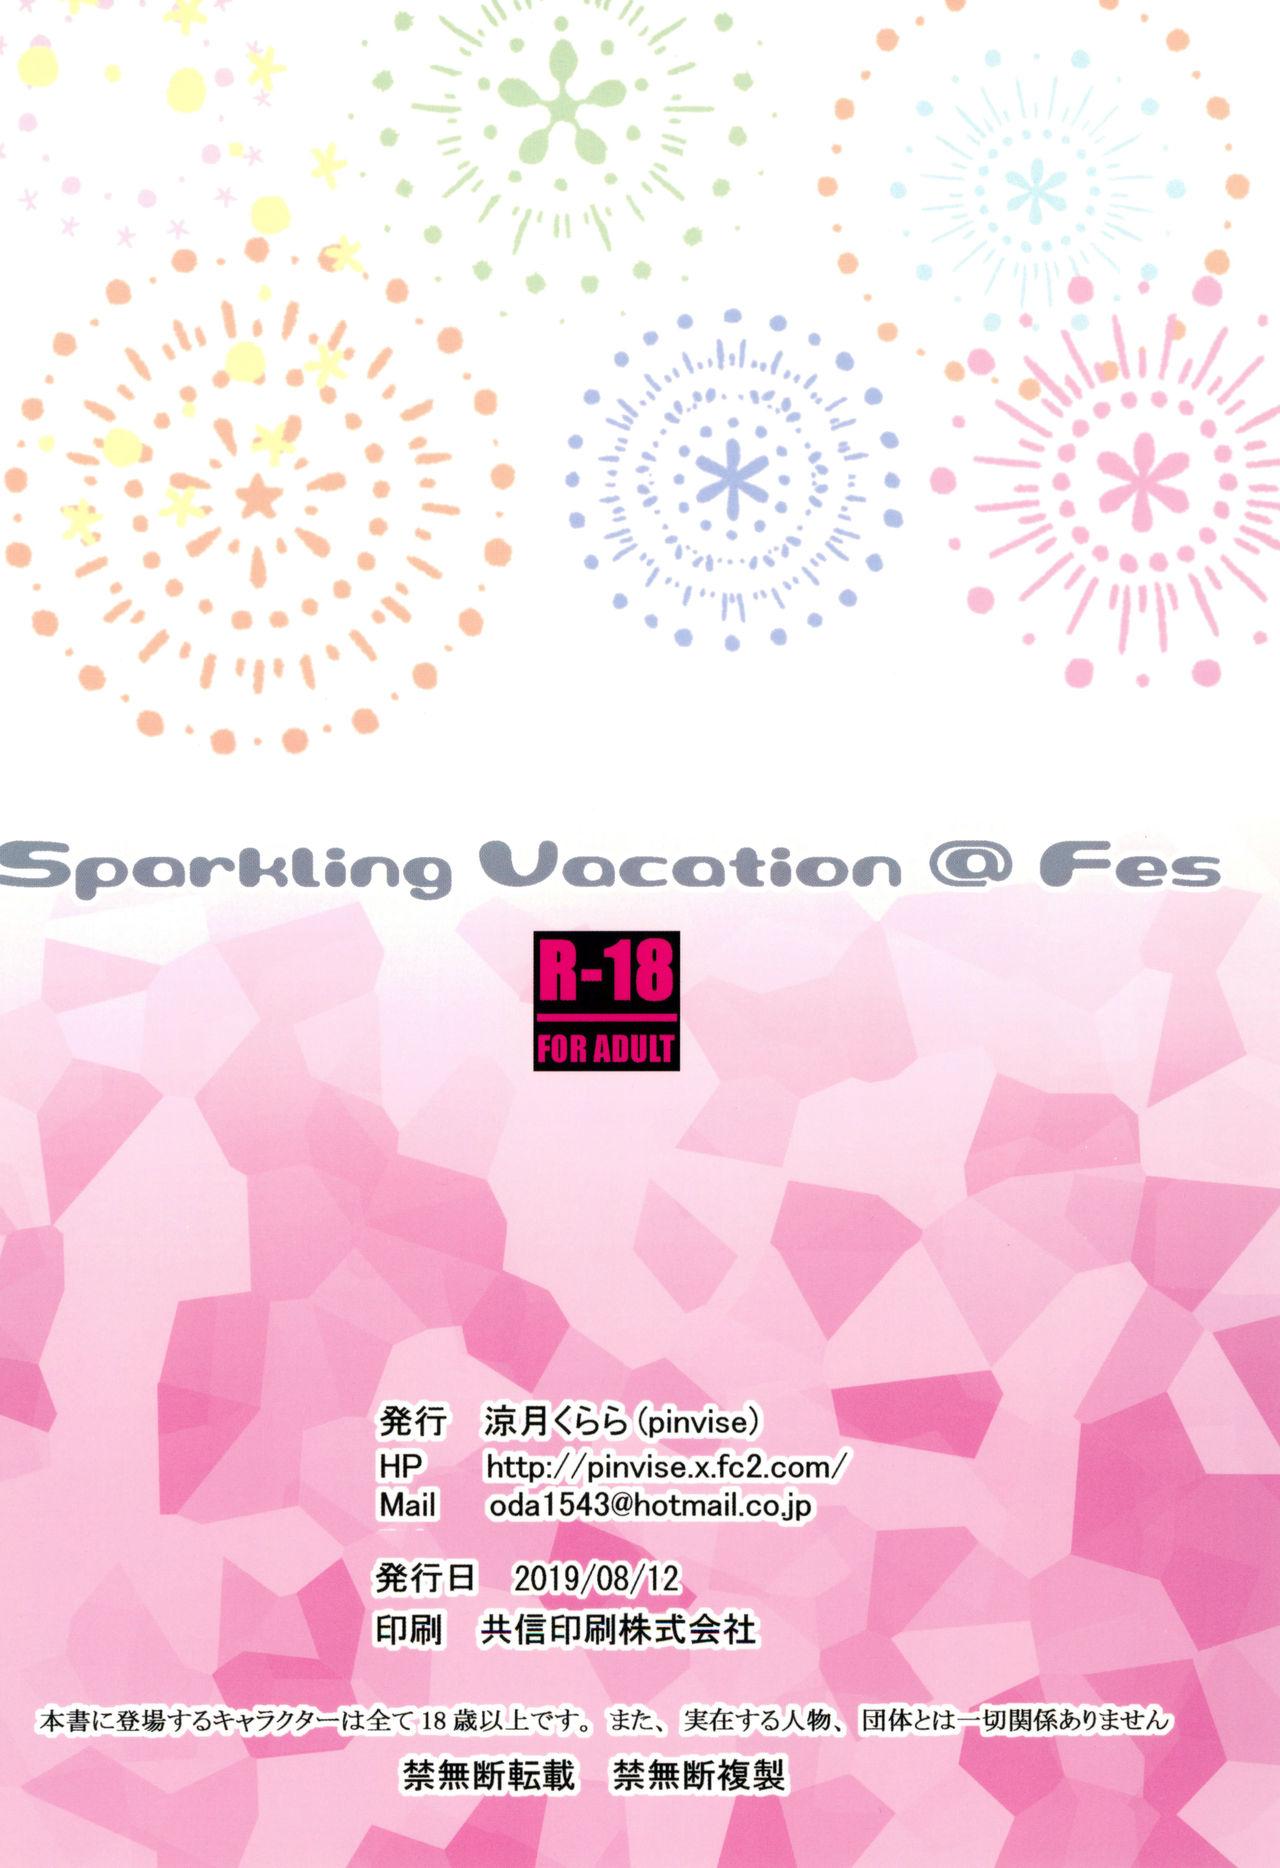 Sparkling Vacation @ Fes 15